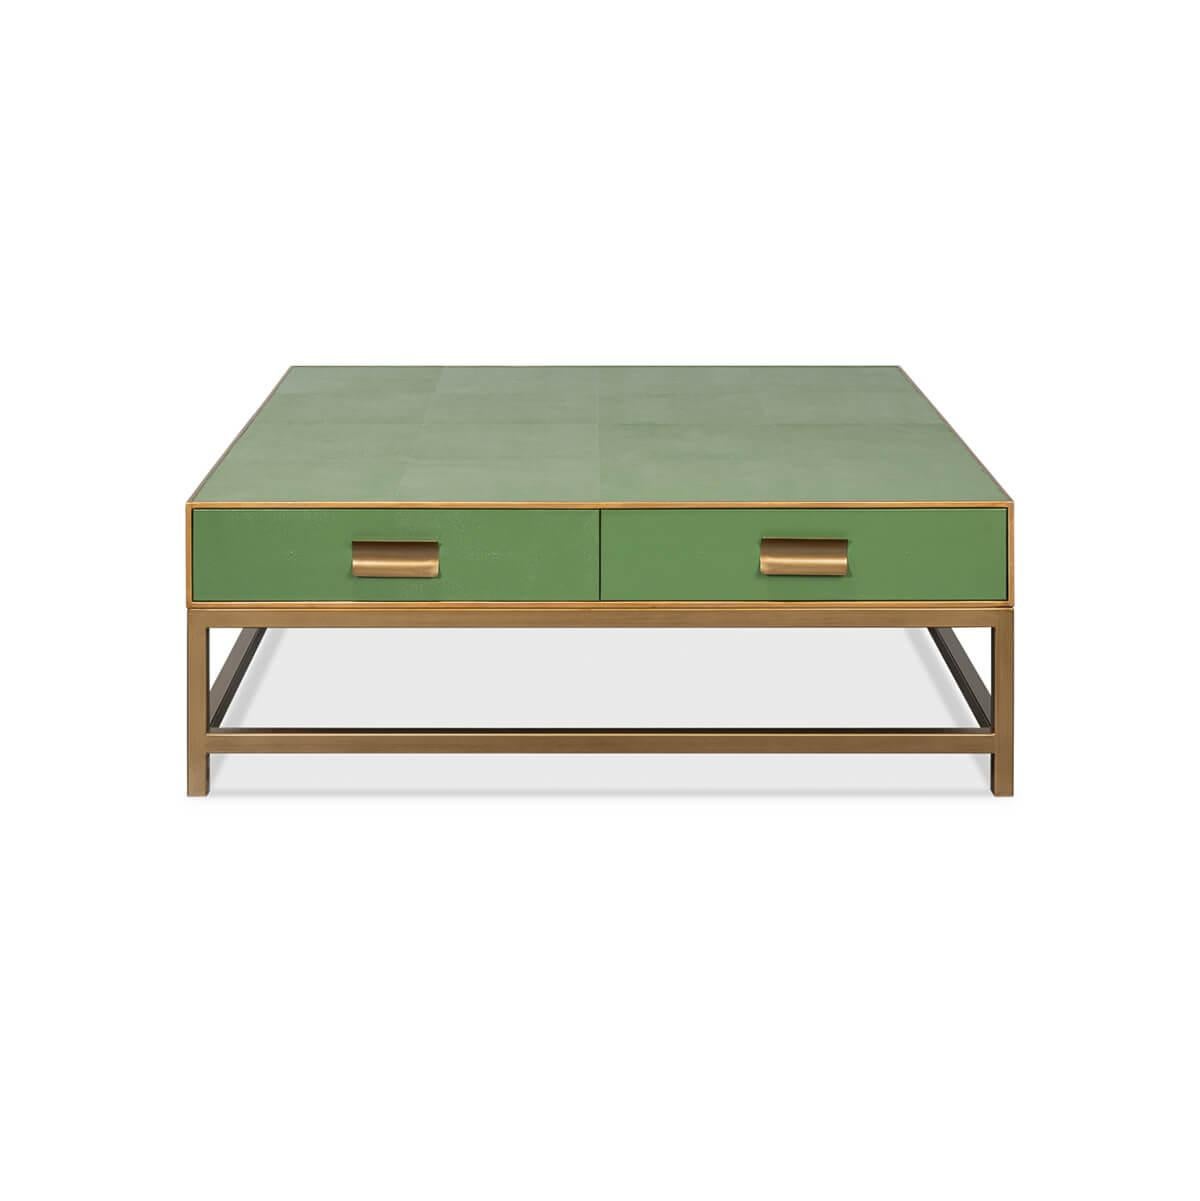 Crafted from wood with a shagreen embossed leather wrapped top, this square coffee table is finished with gold trim and hardware. With two drawers and raised on cube-form base with stretchers. The low-profile design makes it ideal for a functional